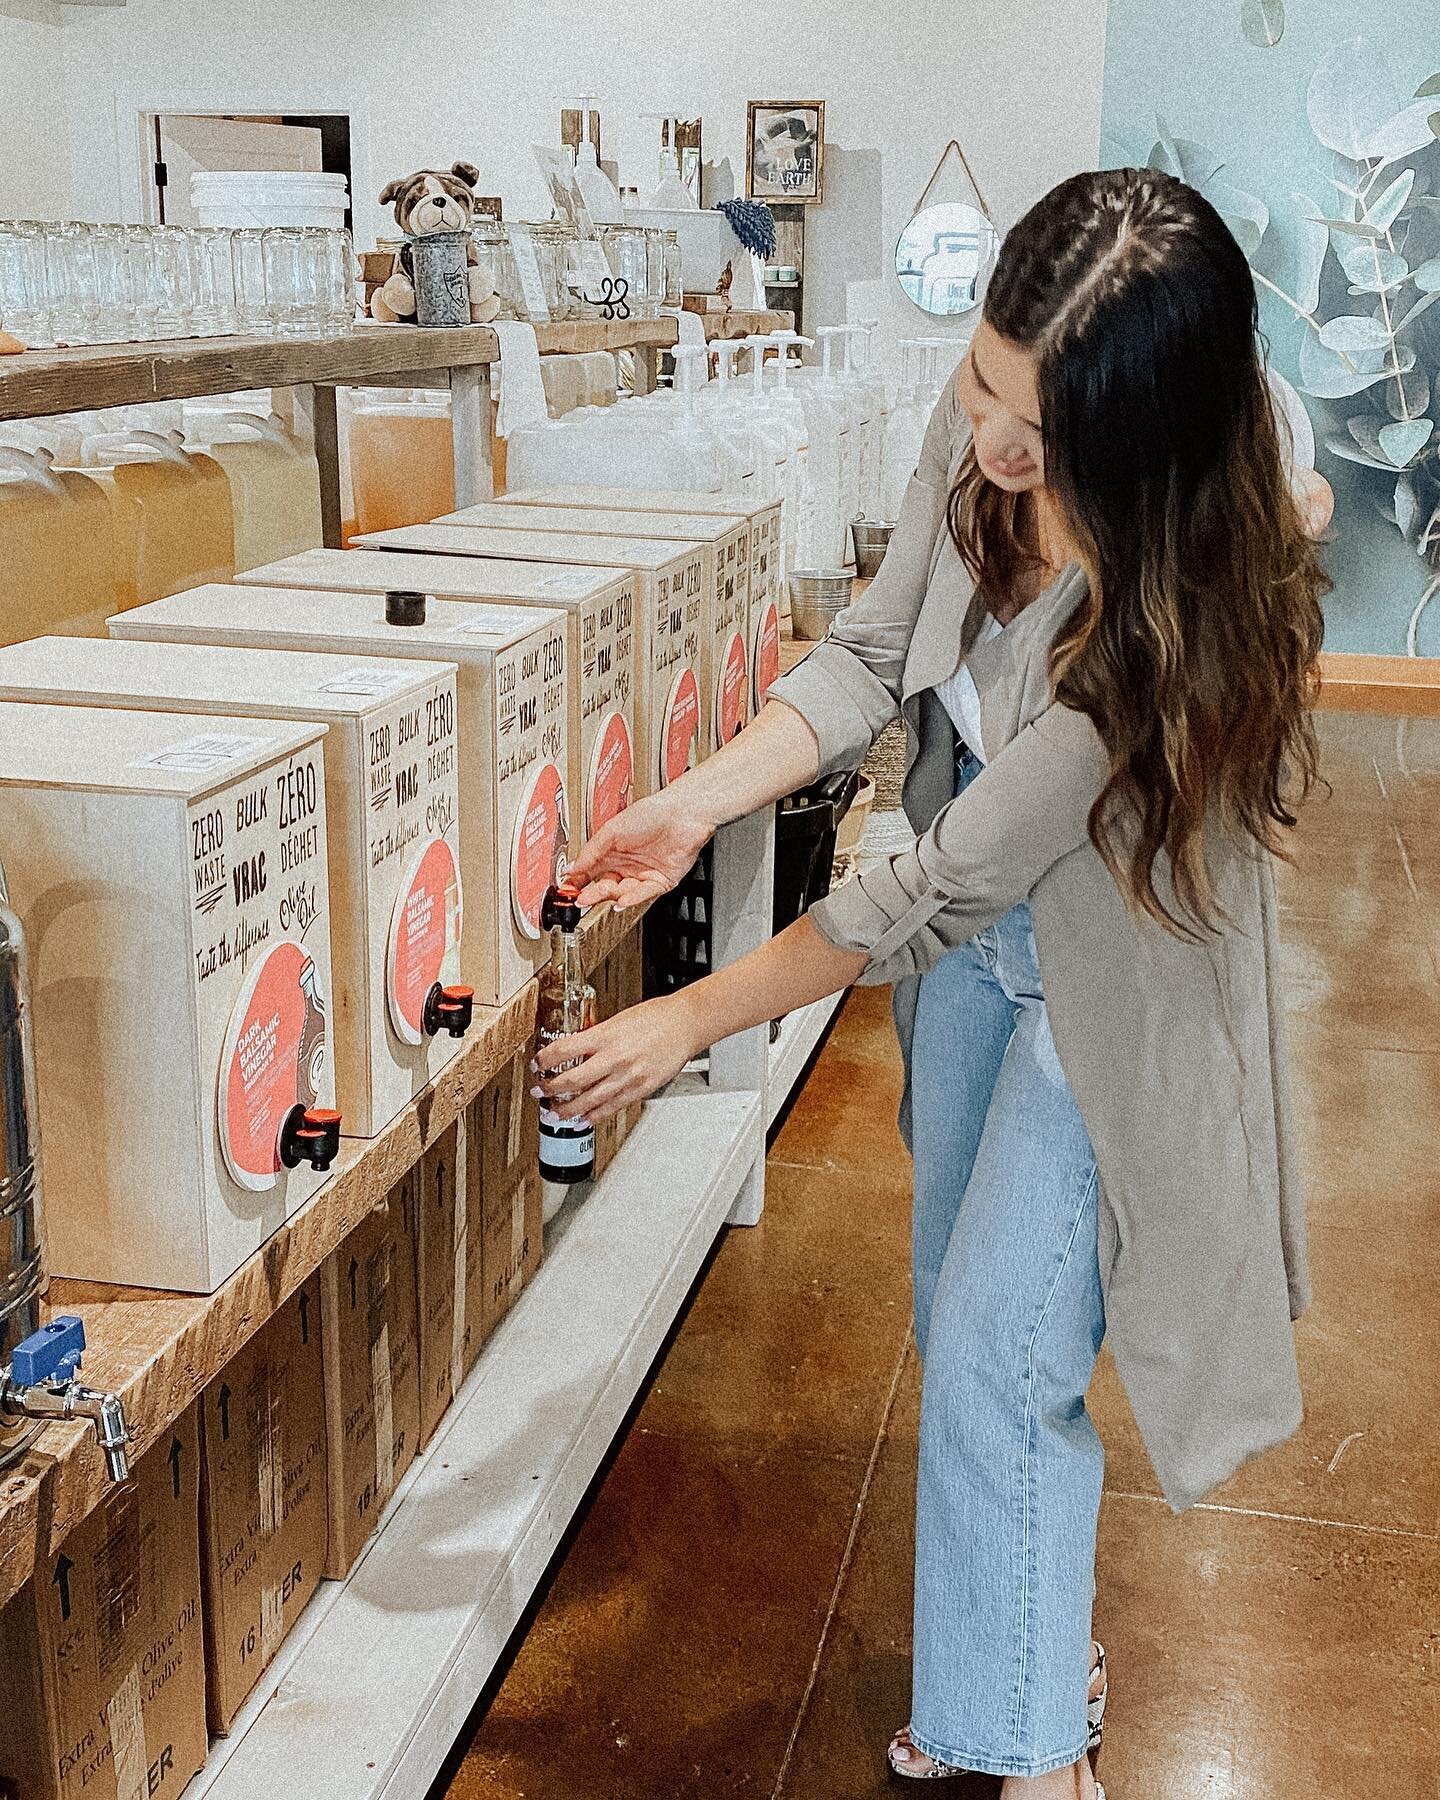 @useitagainstore is Calgary&rsquo;s newest refillery and you need to check it out!

Their goal is to reduce the amount of plastic we use so you can take your old containers and refill them with anything you need for your home!
They have everything fr